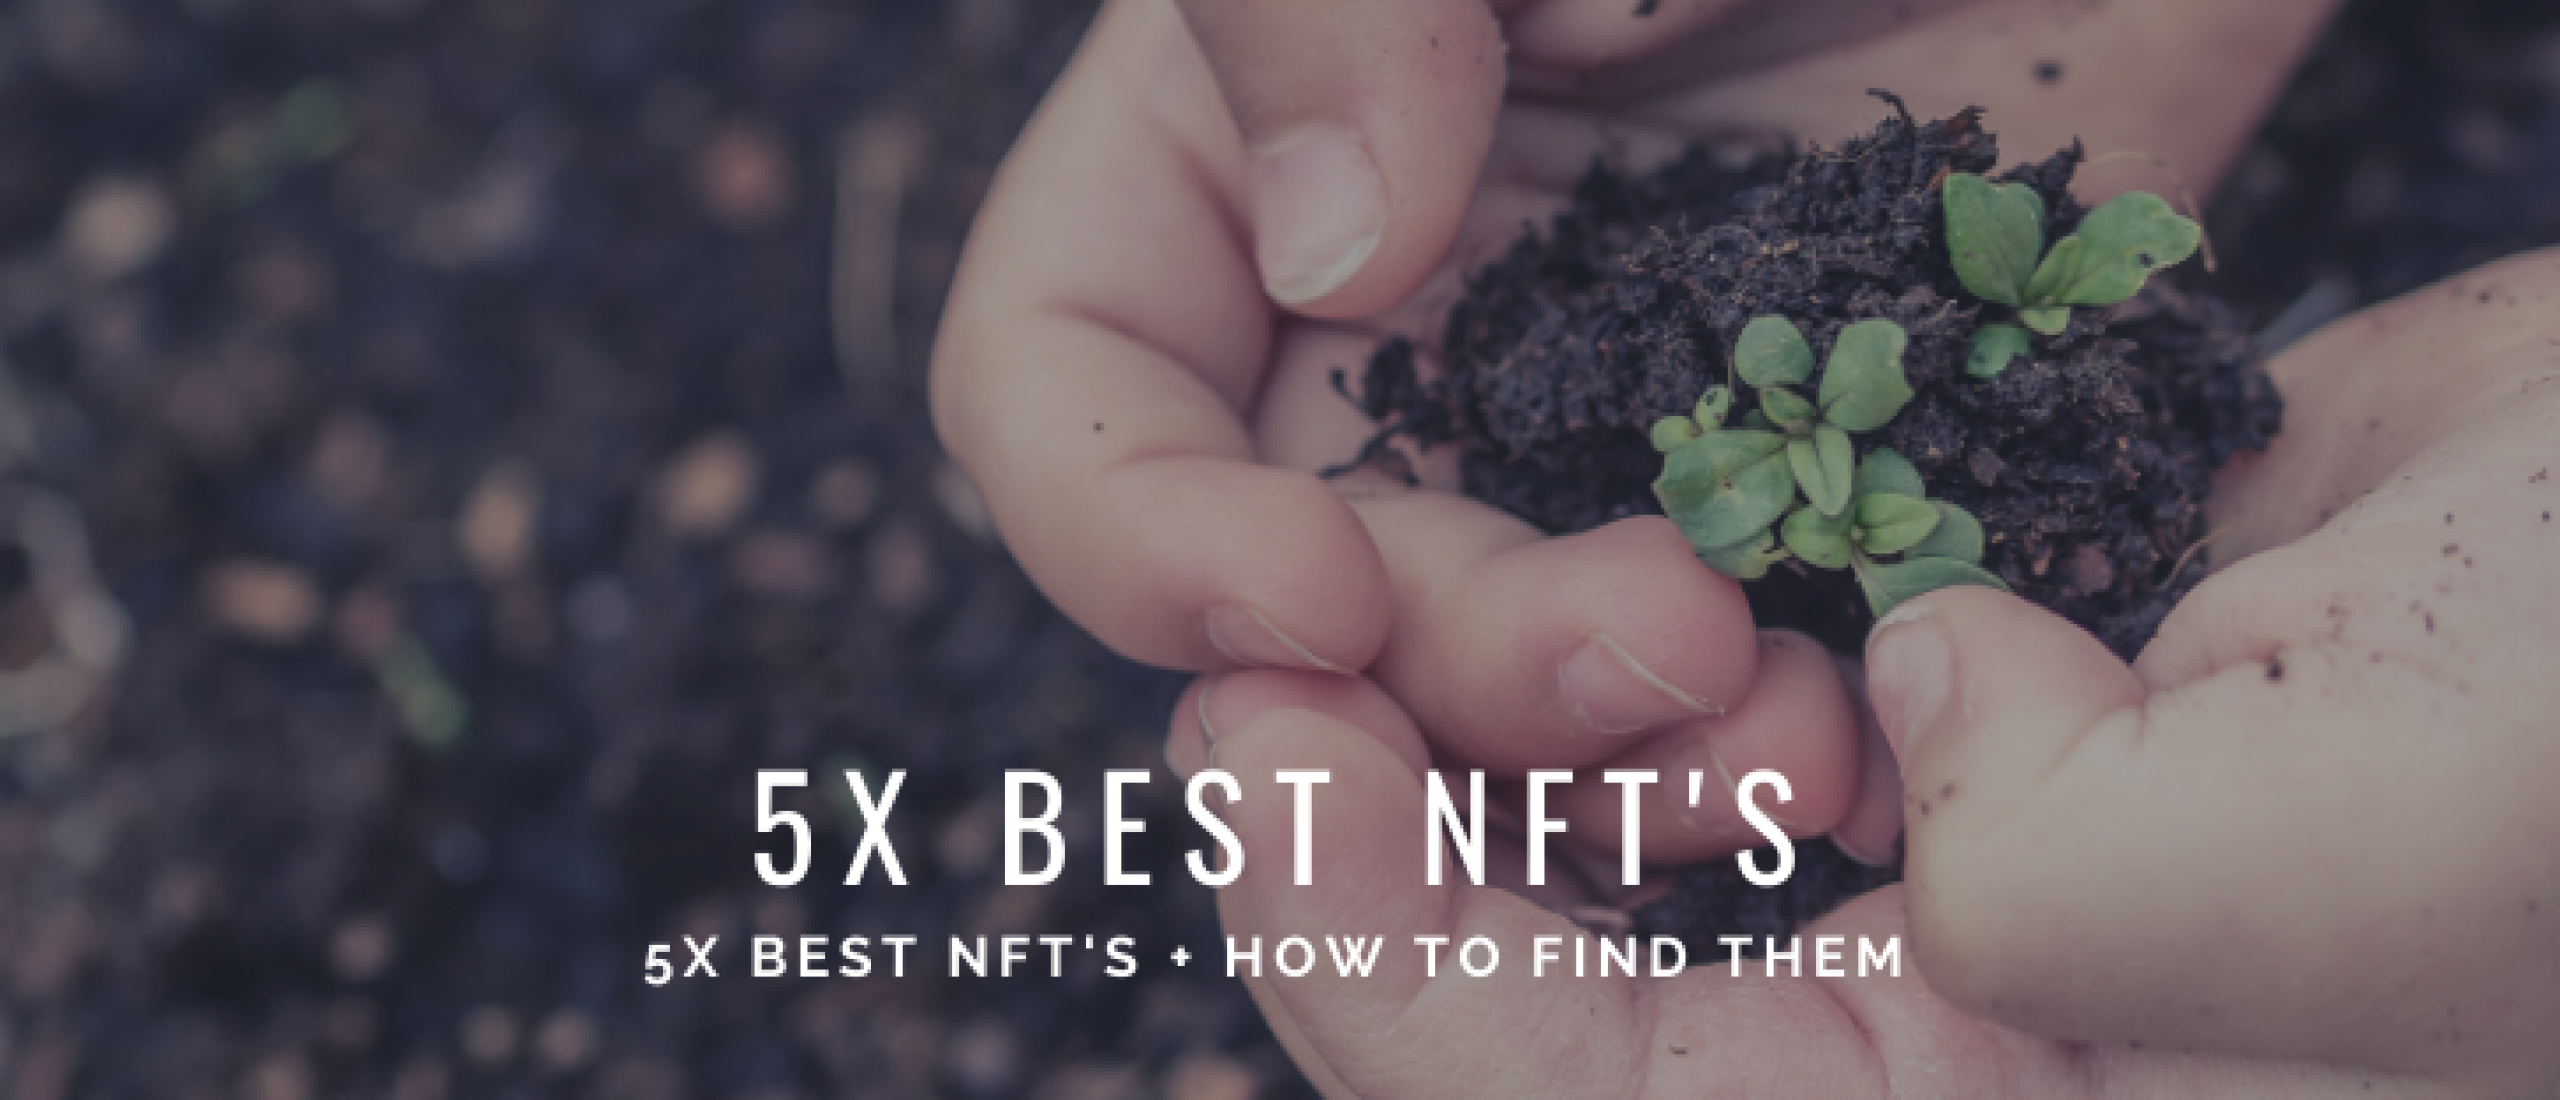 5x Best NFT in 2022 and How To Find The Best NFTs